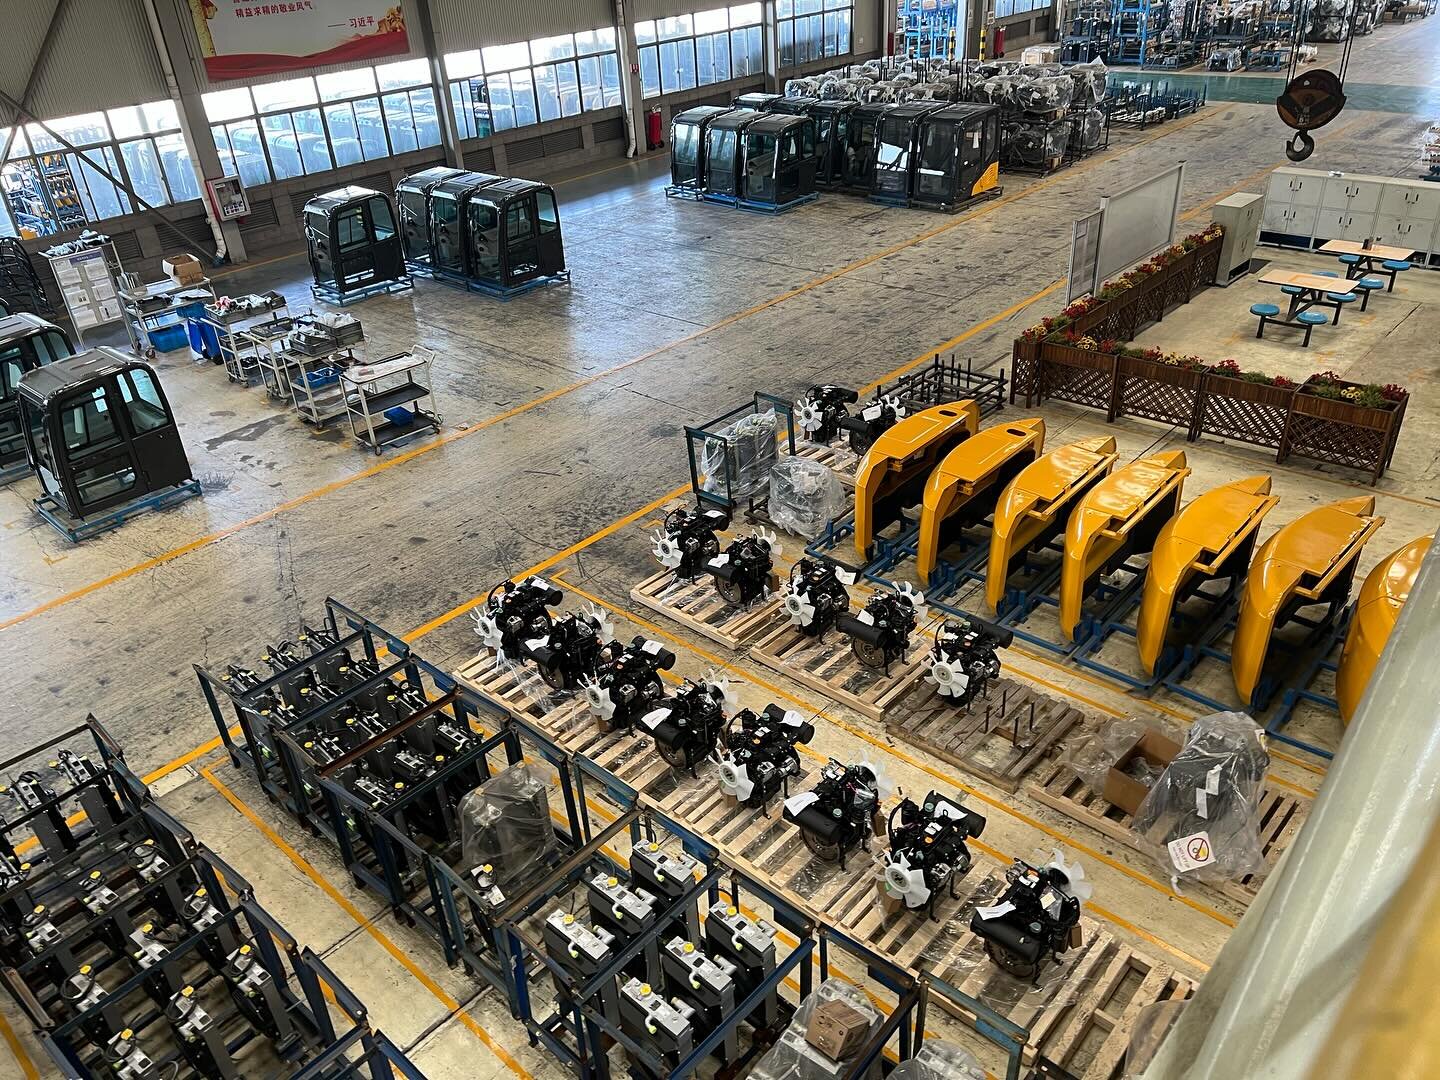 Cutting edge production methods on a global scale, manufacturing electric and diesel plant equipment. @liugongmachinery Tough World - Tough Equipment.